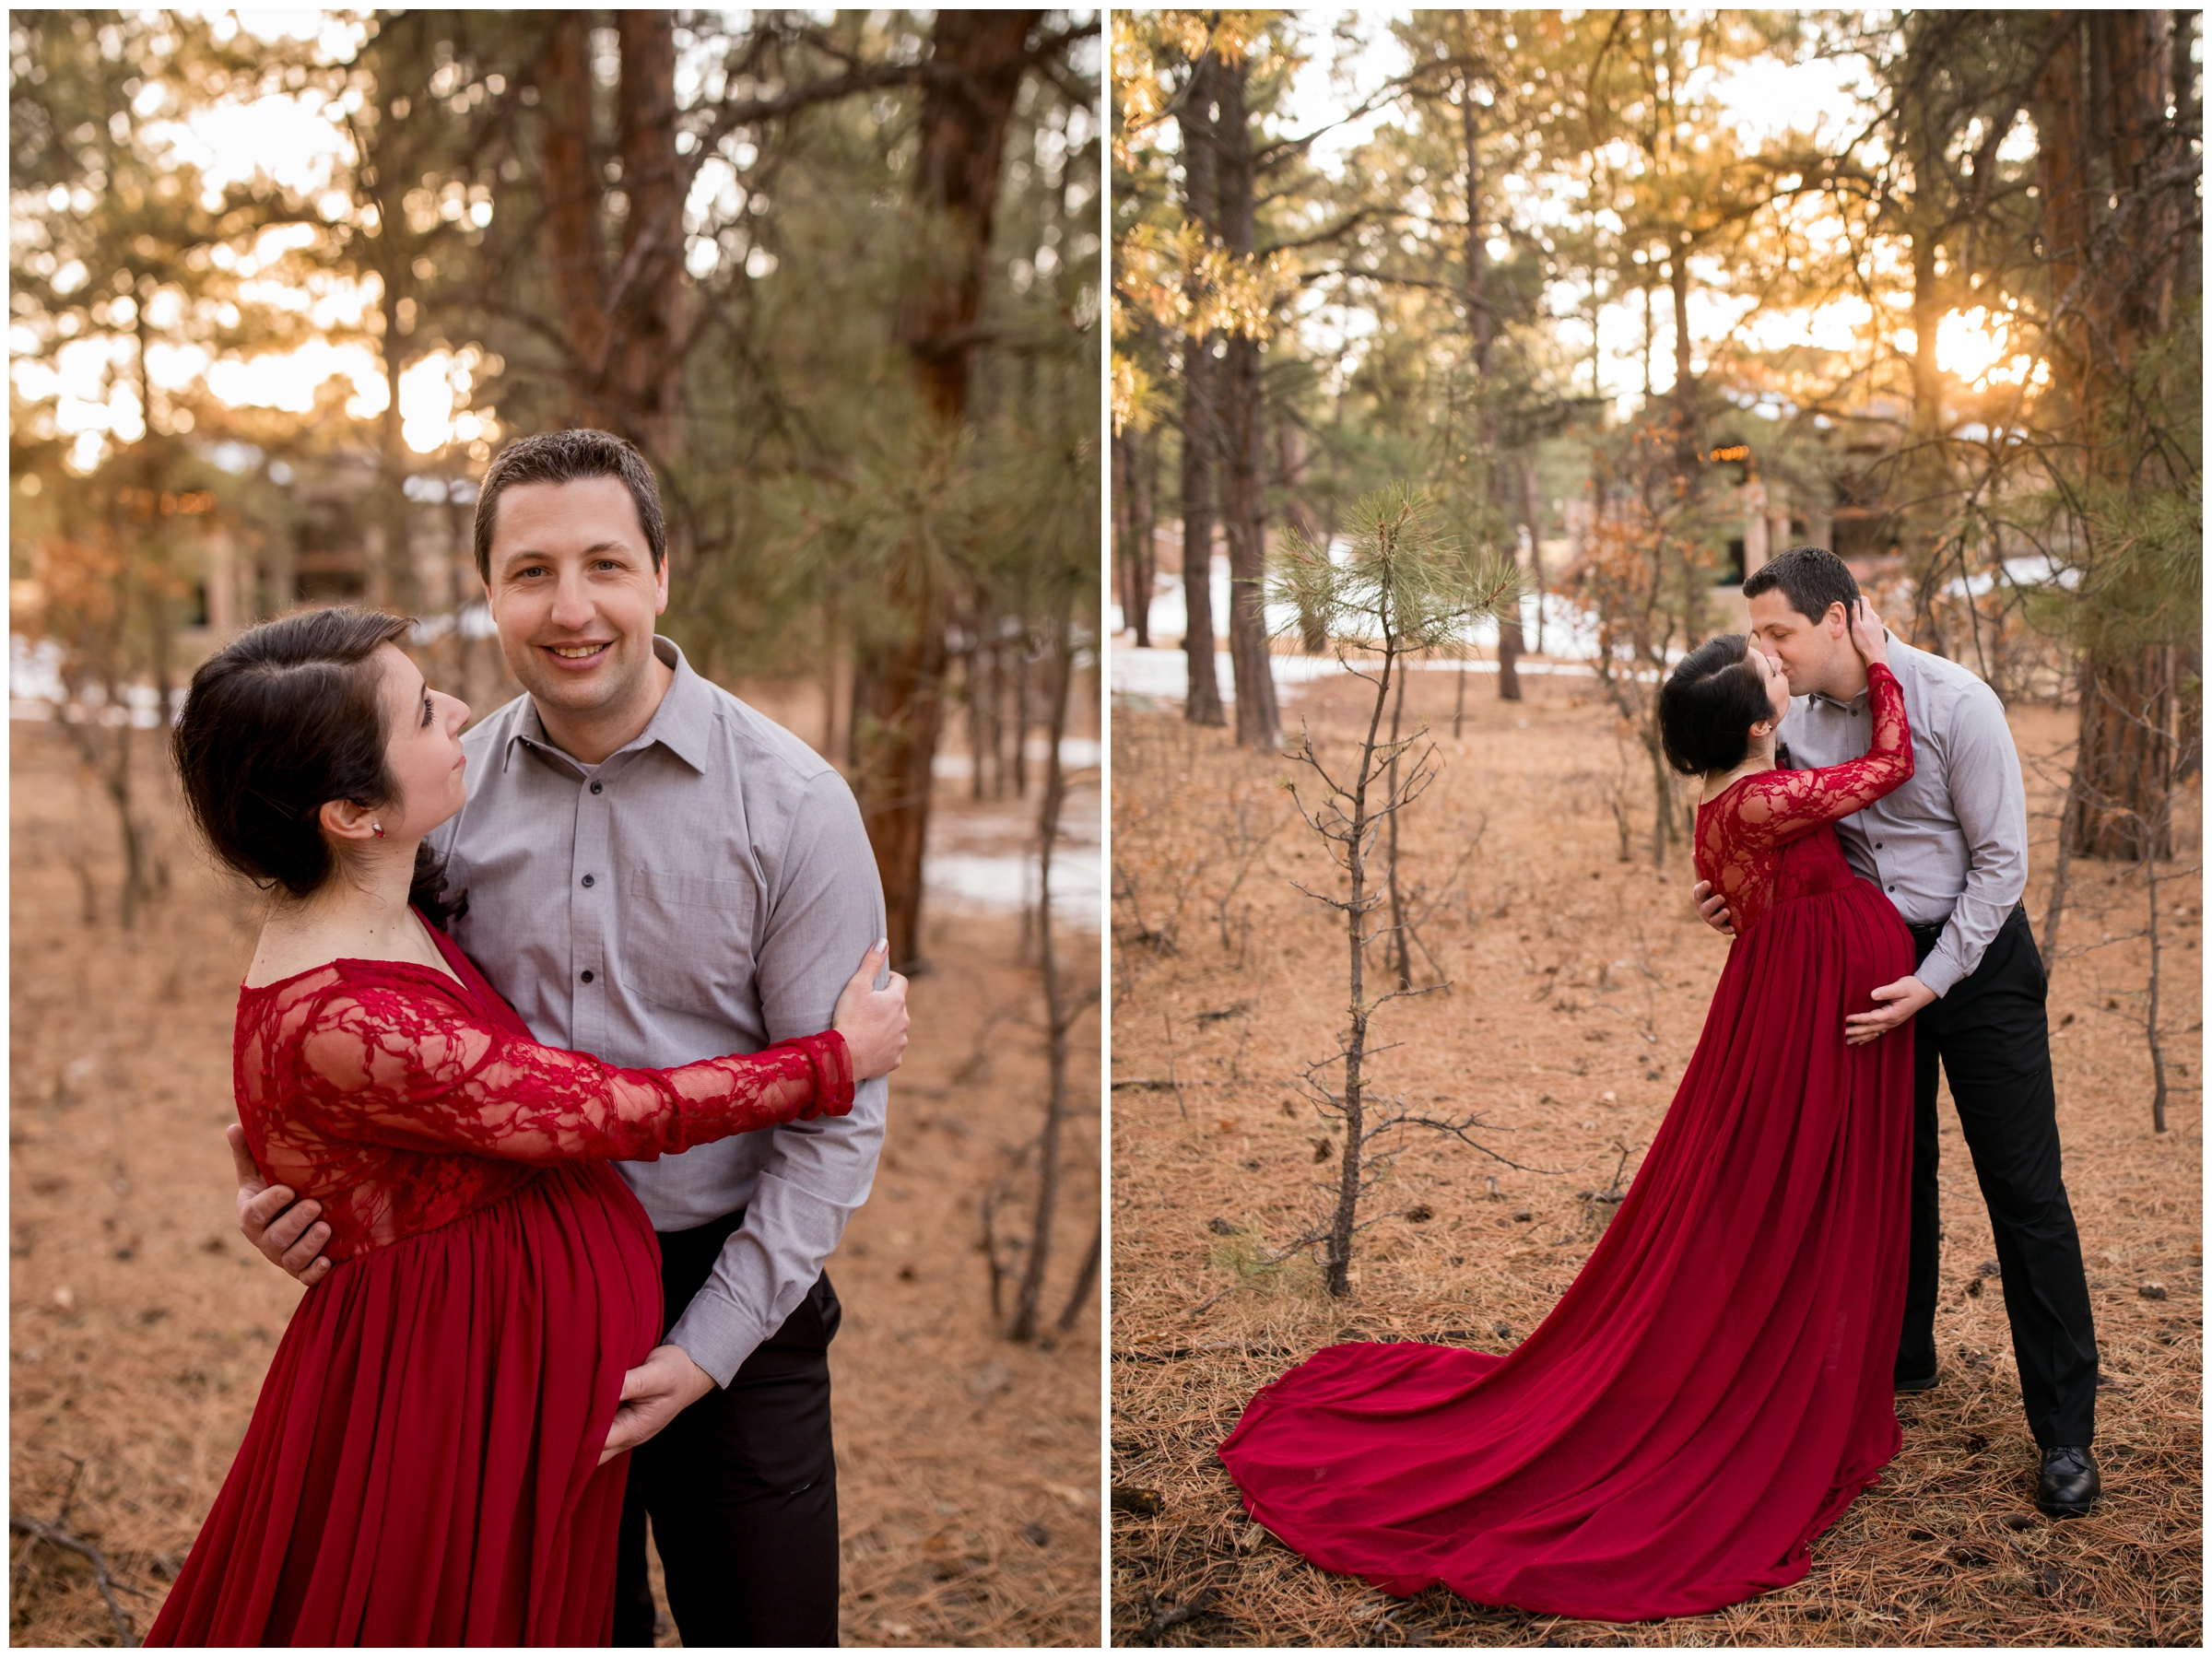 Colorado winter maternity photos in a forest setting by CO portrait photographer Plum Pretty Photography